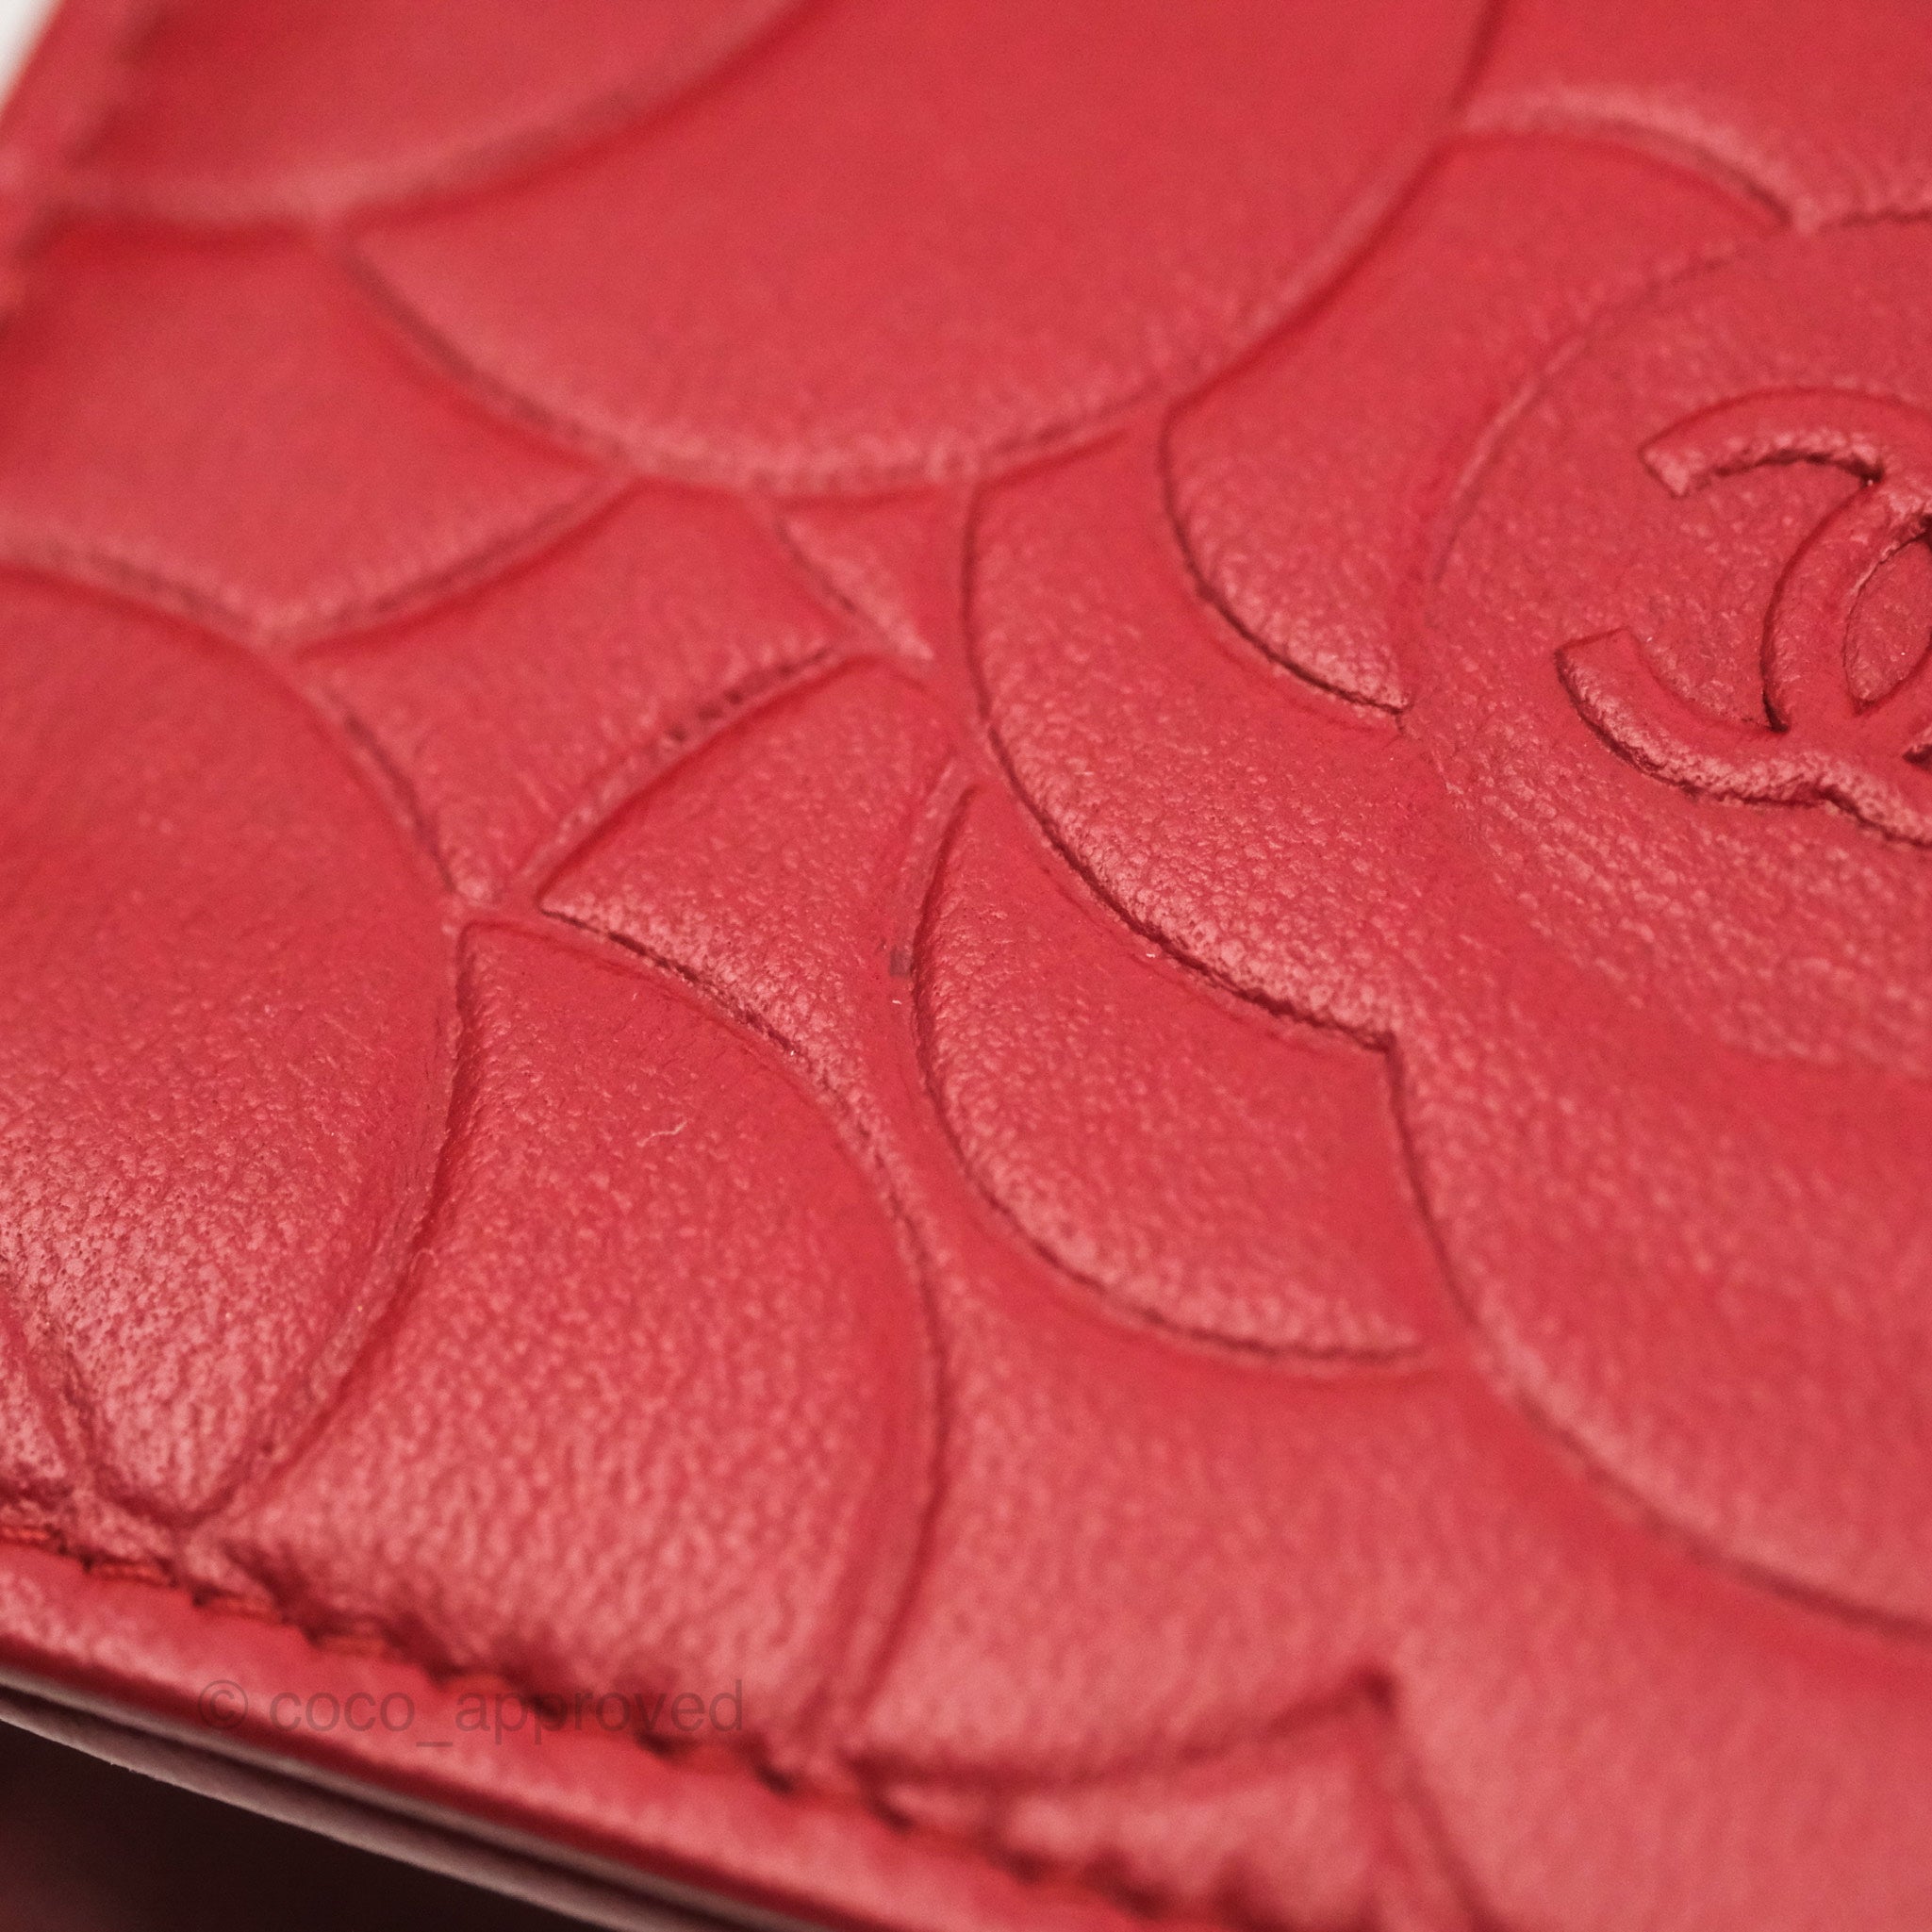 Chanel Camellia Embossed Wallet On Chain WOC Red Lambskin Silver